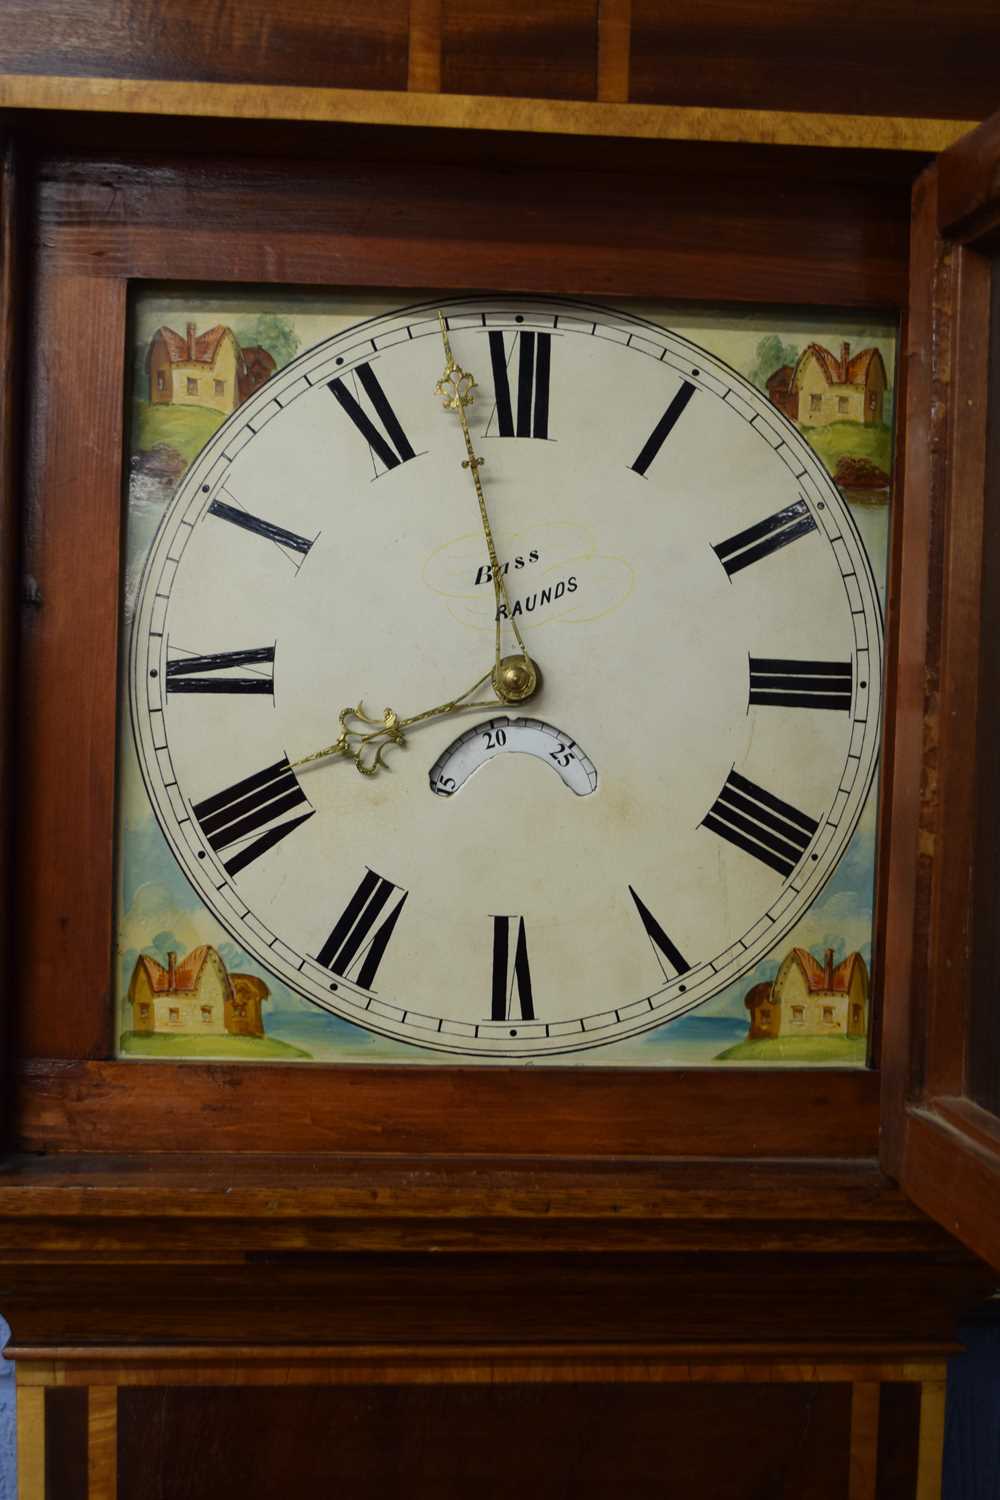 Bass Raunds, 19th century oak and mahogany cased longcase clock with 30-hour movement striking on - Image 3 of 3